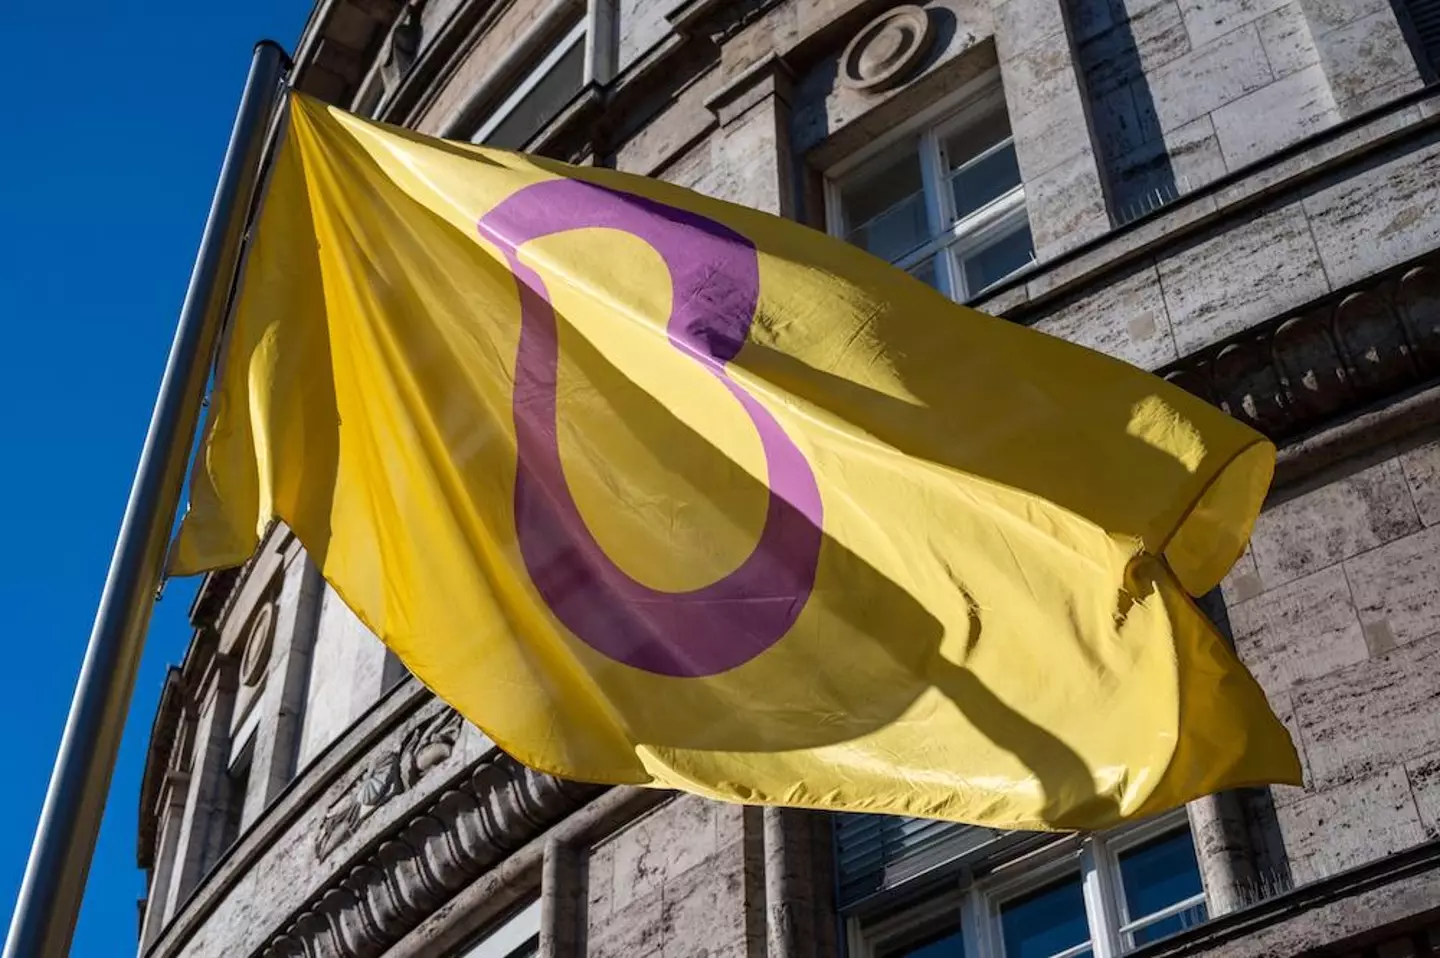 The intersex community is seeking to end non-consensual intersex surgery.